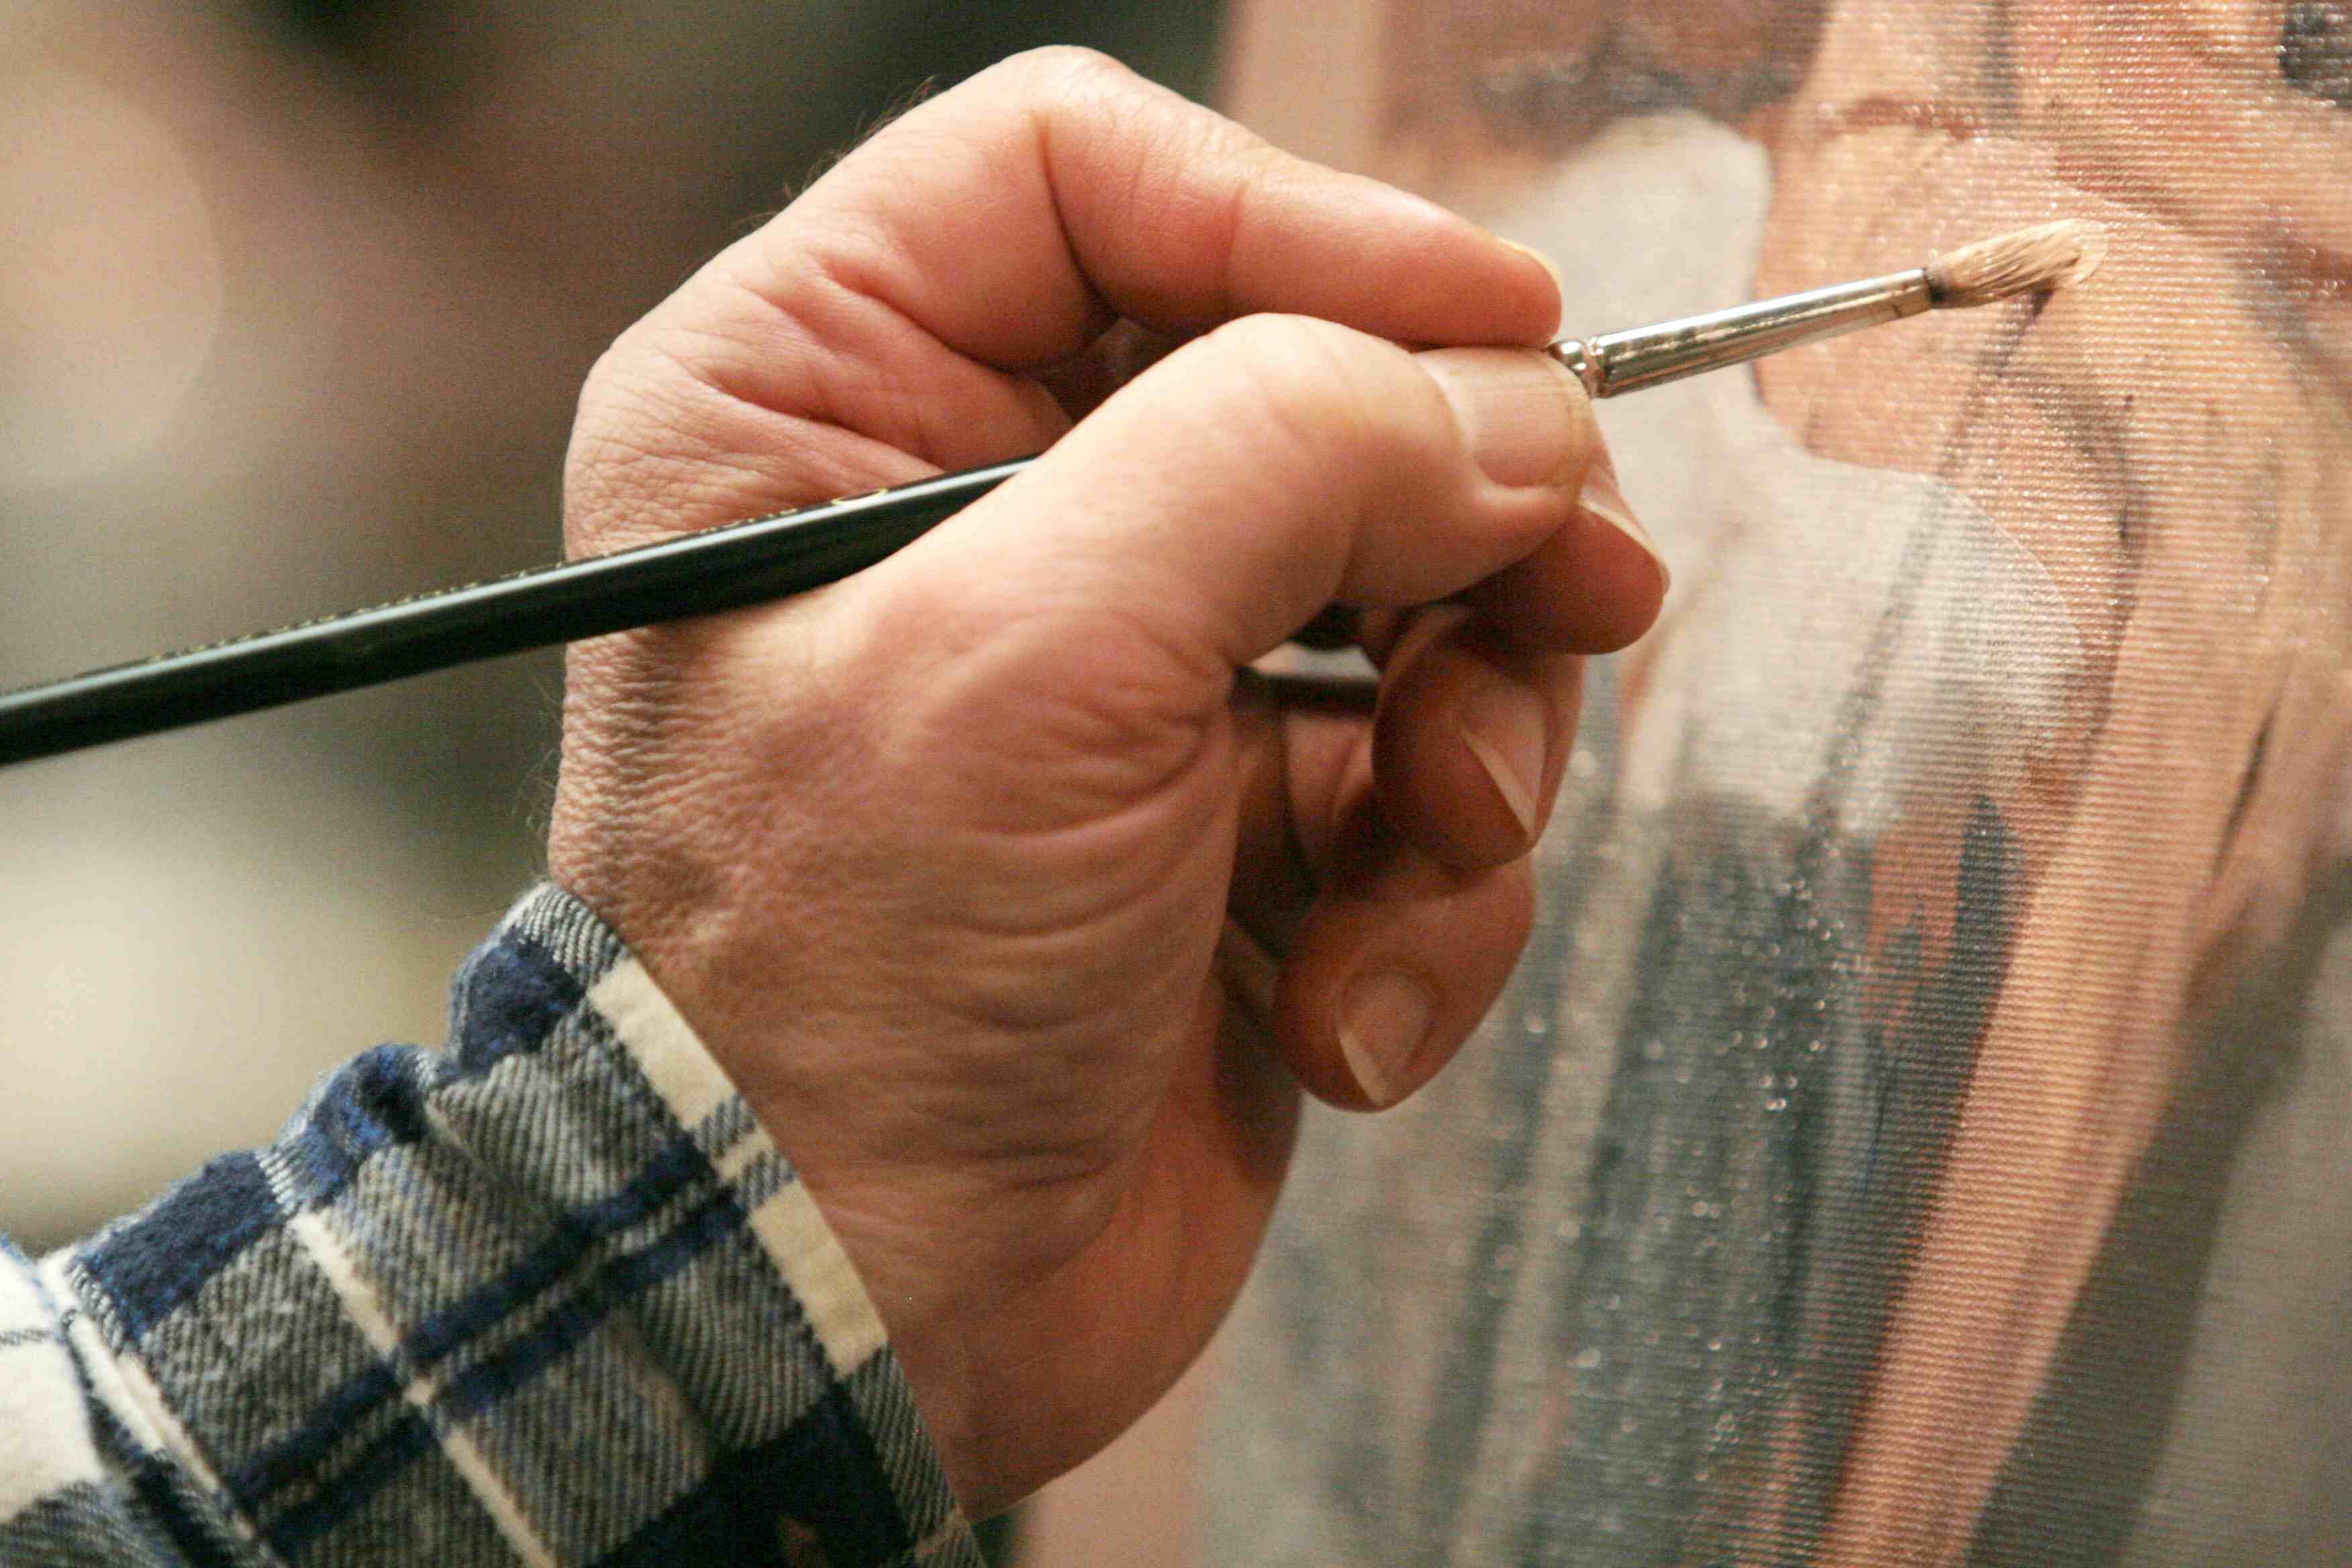 A close up shot of a hand holding a paintbrush to a painting.